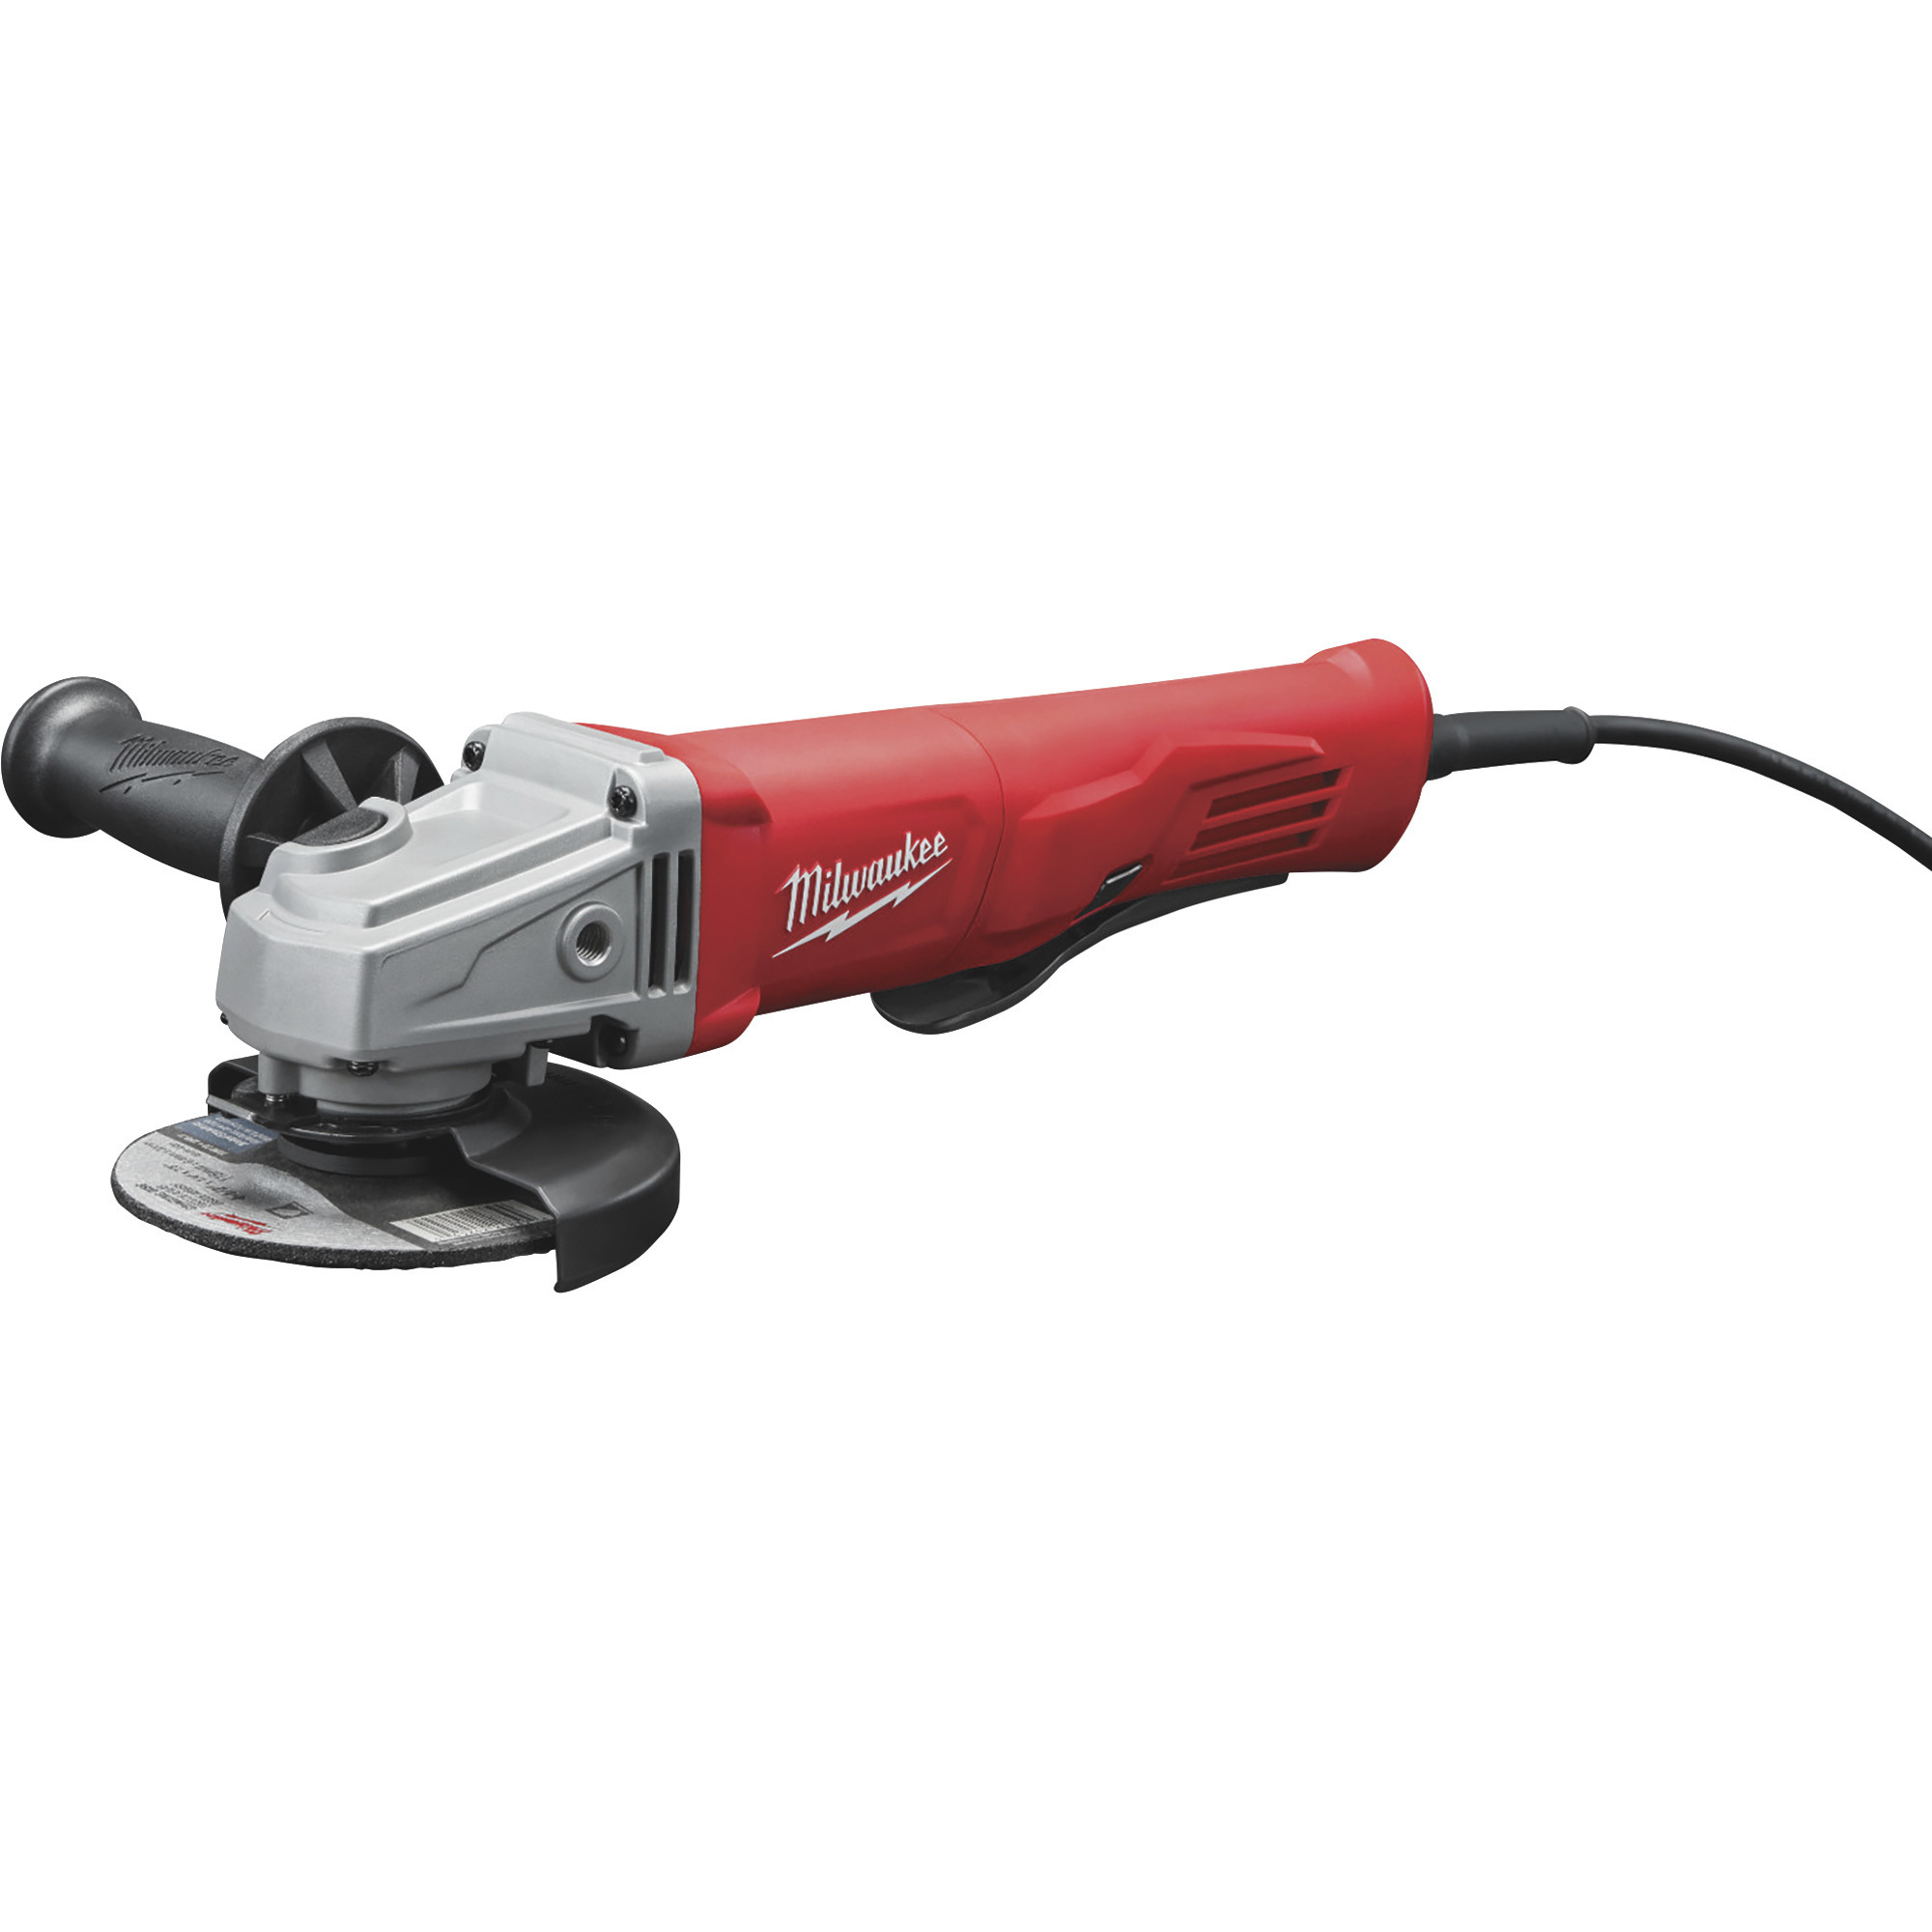 Milwaukee 4 1/2Inch Small Angle Grinder Kit, 11 Amp, 11,000 RPM, Paddle, Lock-On, Model 6142-30